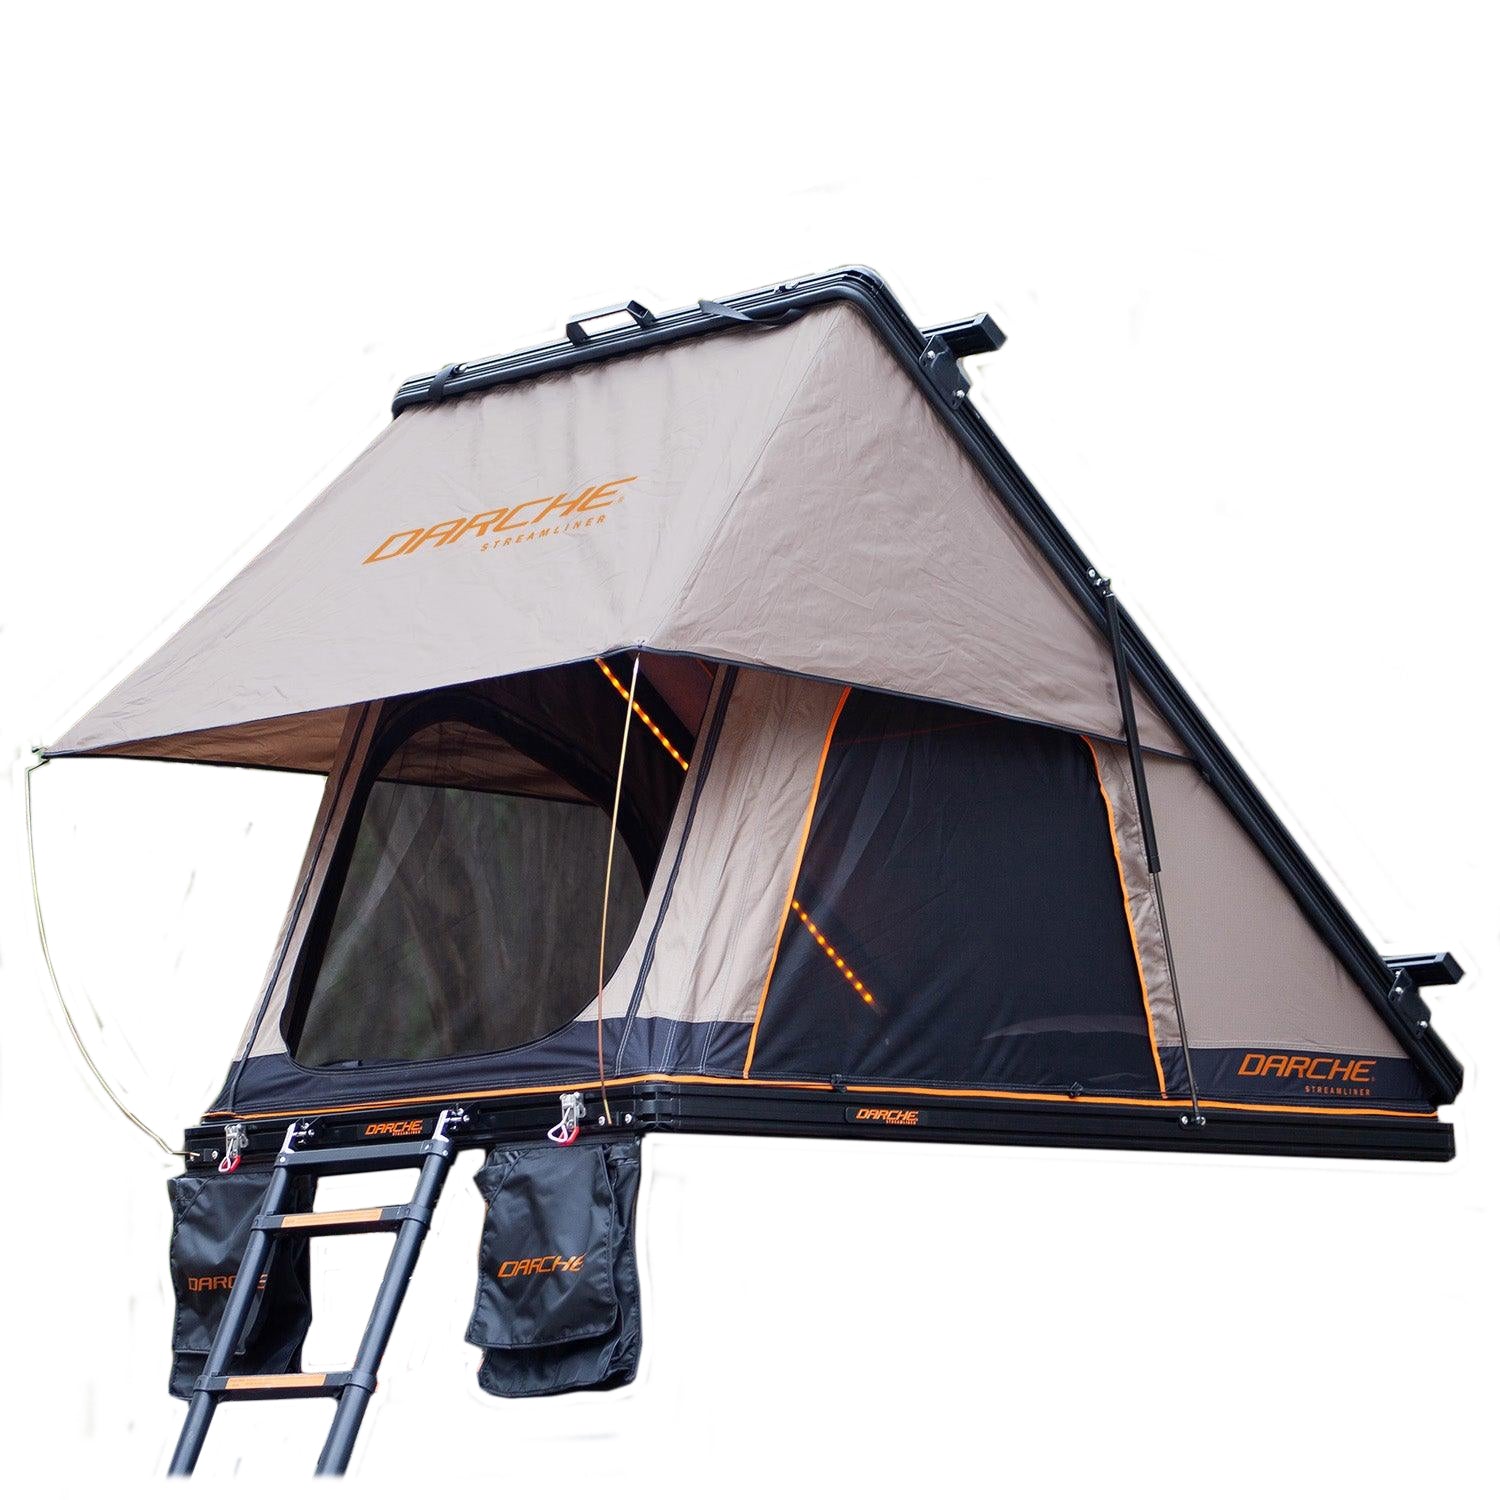 35.99 Today Only ] Automatic Inflatable Tent